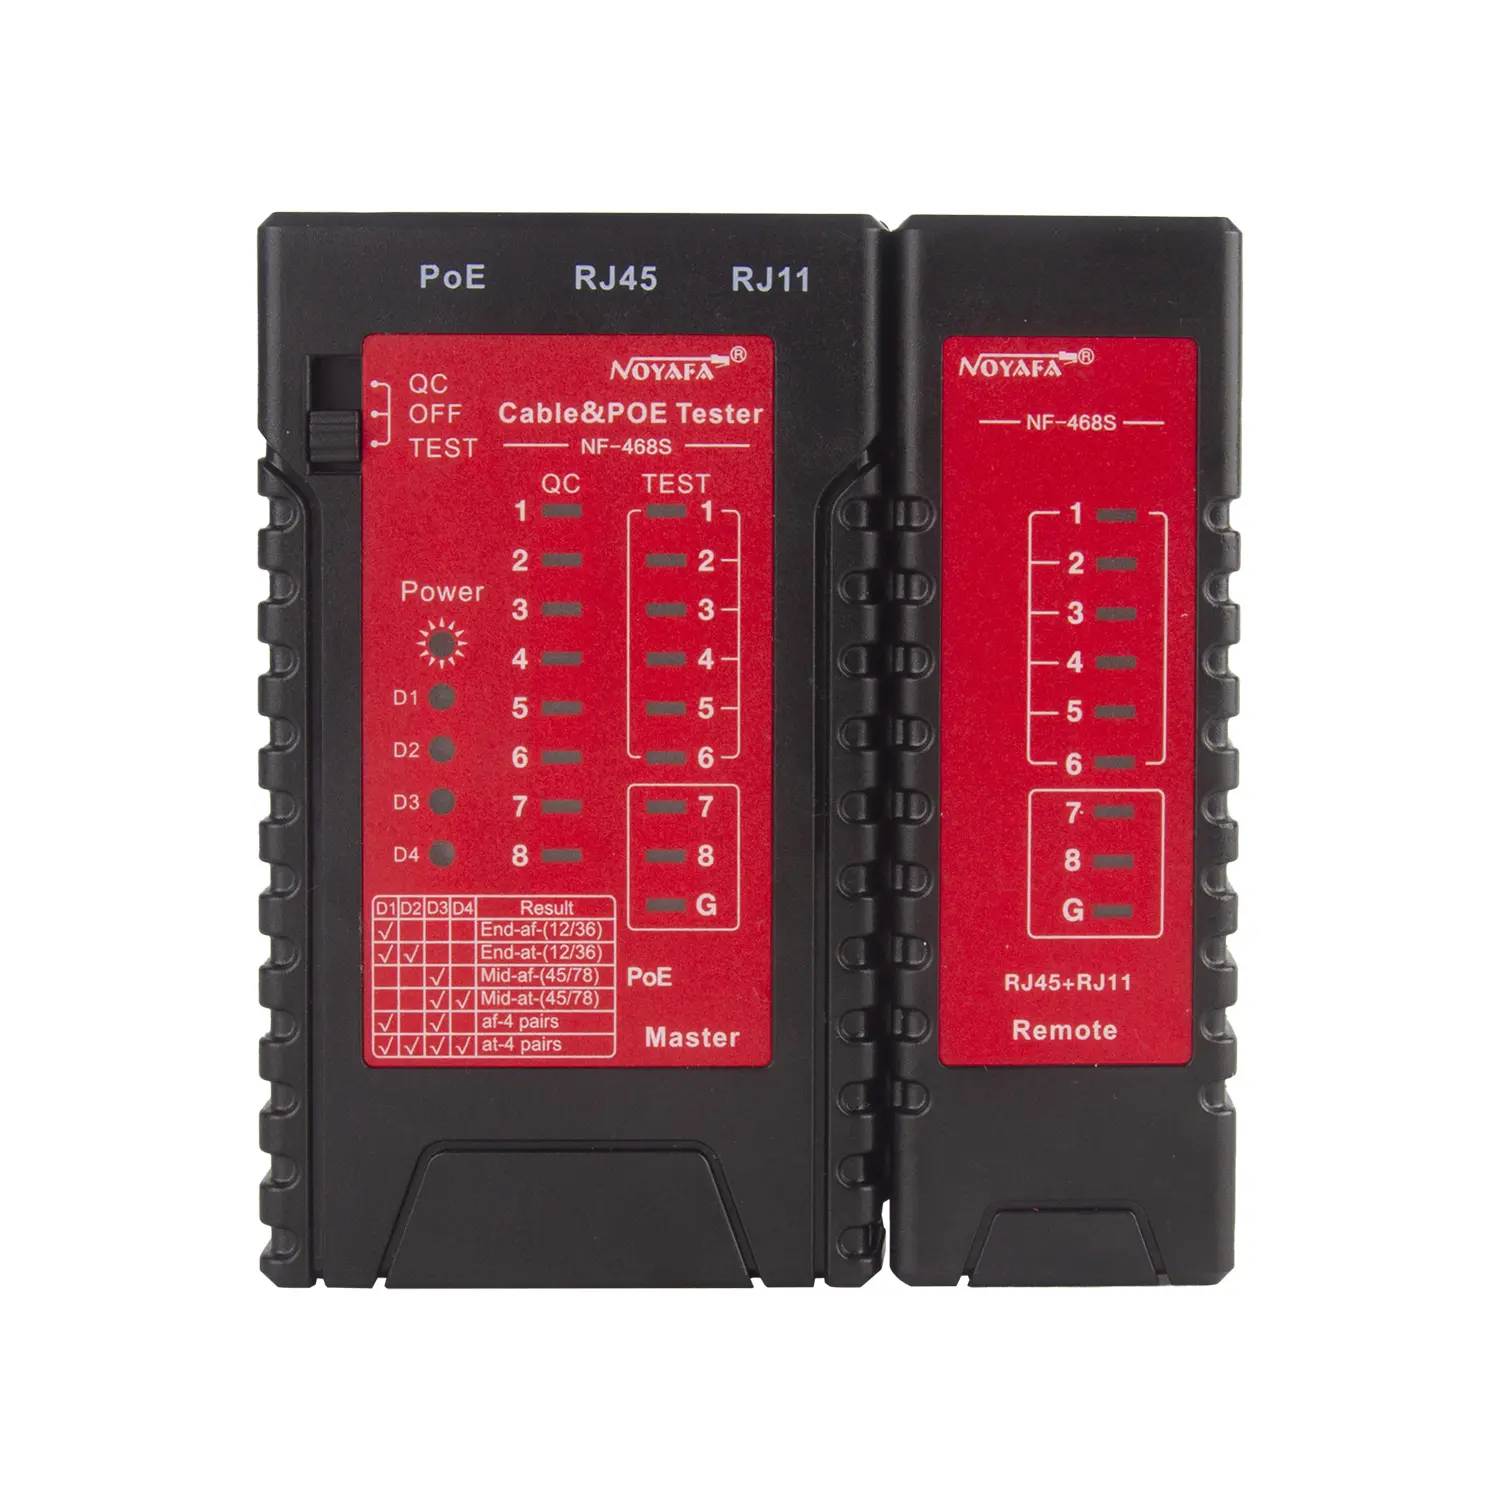 Cable POE tester check continuity of RJ11 RJ45 cable quickly and Identify the type of power source